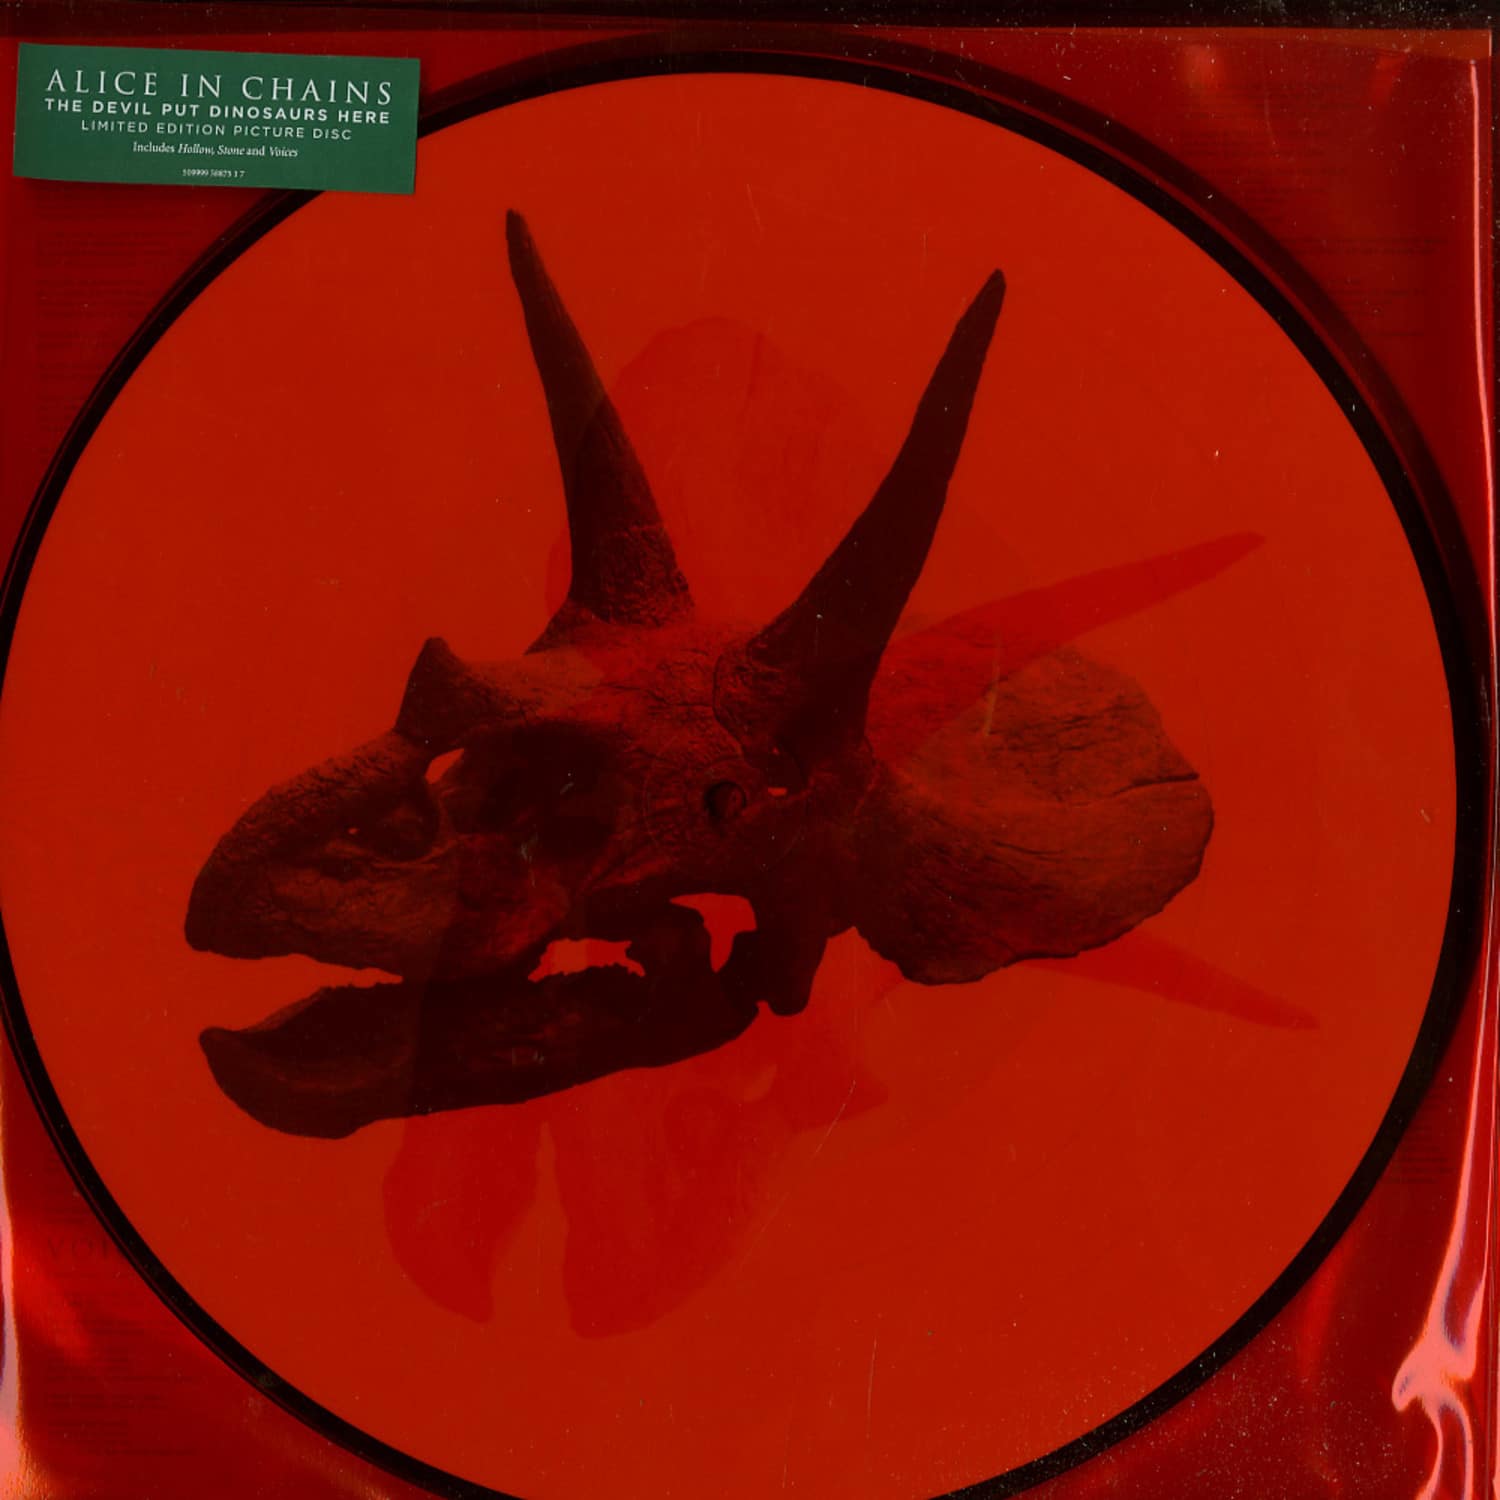 Alice In Chains - THE DEVIL PUT DINOSAURS HERE 